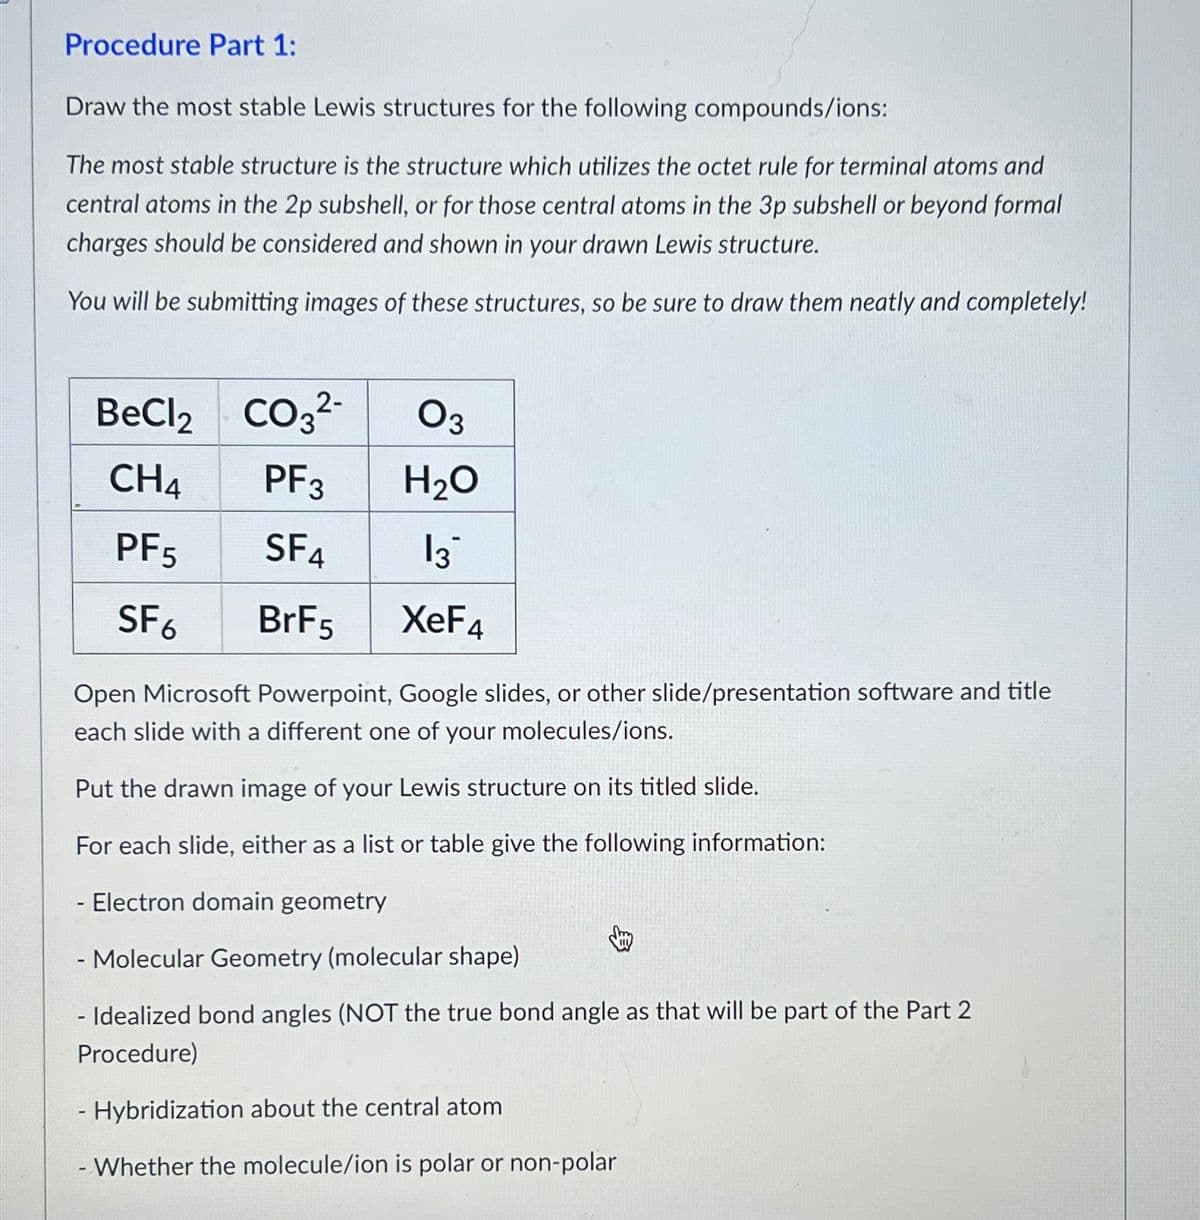 Procedure Part 1:
Draw the most stable Lewis structures for the following compounds/ions:
The most stable structure is the structure which utilizes the octet rule for terminal atoms and
central atoms in the 2p subshell, or for those central atoms in the 3p subshell or beyond formal
charges should be considered and shown in your drawn Lewis structure.
You will be submitting images of these structures, so be sure to draw them neatly and completely!
BeCl2
CH4
PF5
SF6
CO3²-
2-
PF3
SF4
BrF5
03
H₂O
13
XeF4
Open Microsoft Powerpoint, Google slides, or other slide/presentation software and title
each slide with a different one of your molecules/ions.
Put the drawn image of your Lewis structure on its titled slide.
For each slide, either as a list or table give the following information:
- Electron domain geometry
- Molecular Geometry (molecular shape)
- Idealized bond angles (NOT the true bond angle as that will be part of the Part 2
Procedure)
- Hybridization about the central atom
- Whether the molecule/ion is polar or non-polar